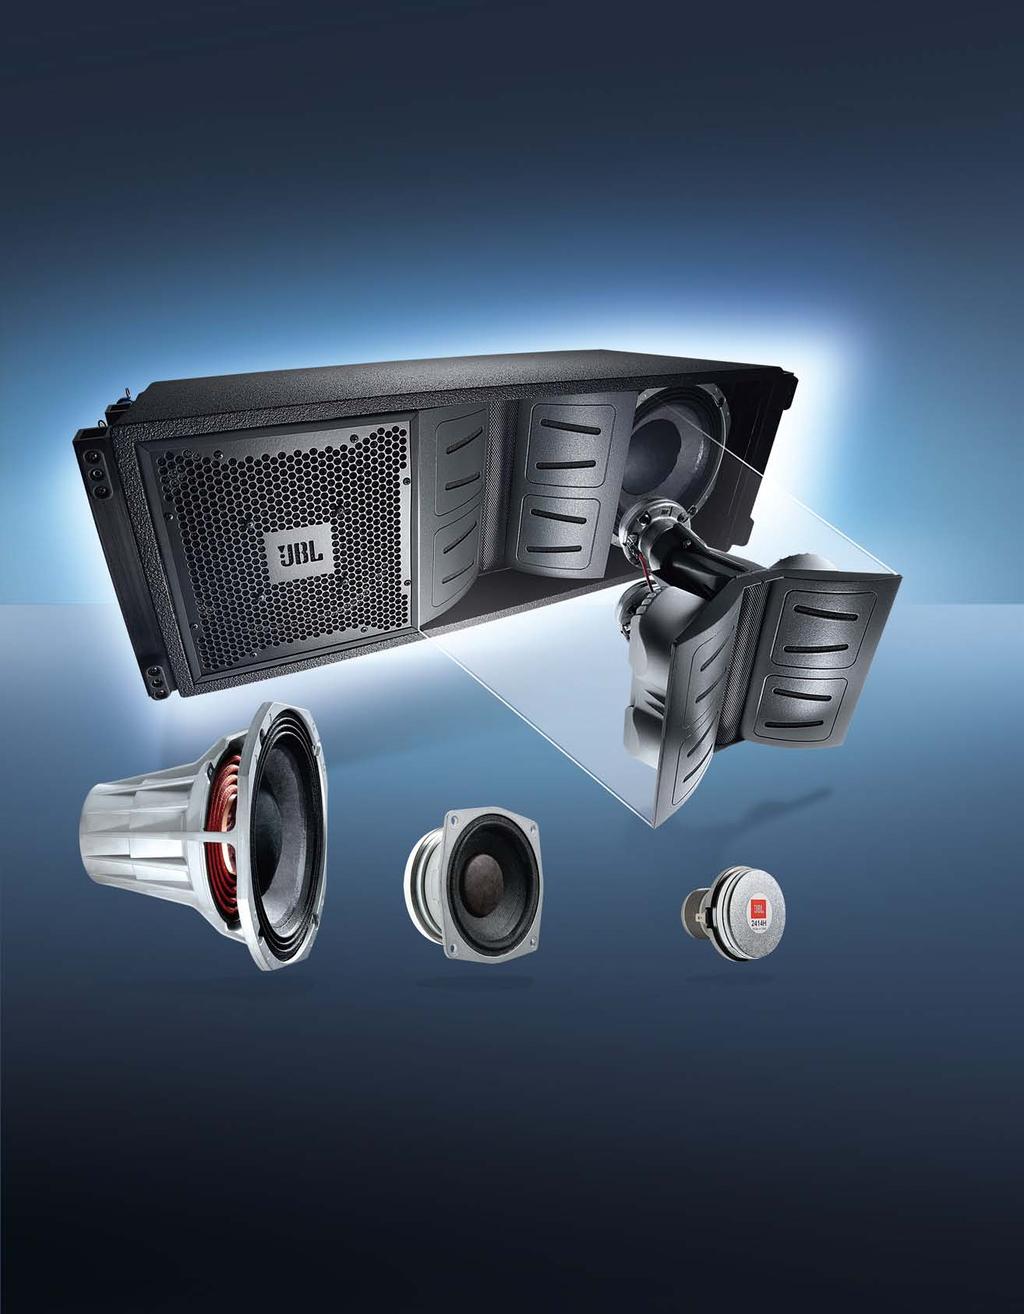 SUBCOMPACT system Smallest system enclosures in the VERTEC product family, the VT4886 Passive 3-Way High Directivity Line Array Element and its companion VT4883 Cardioid-Arrayable Subwoofer provide a